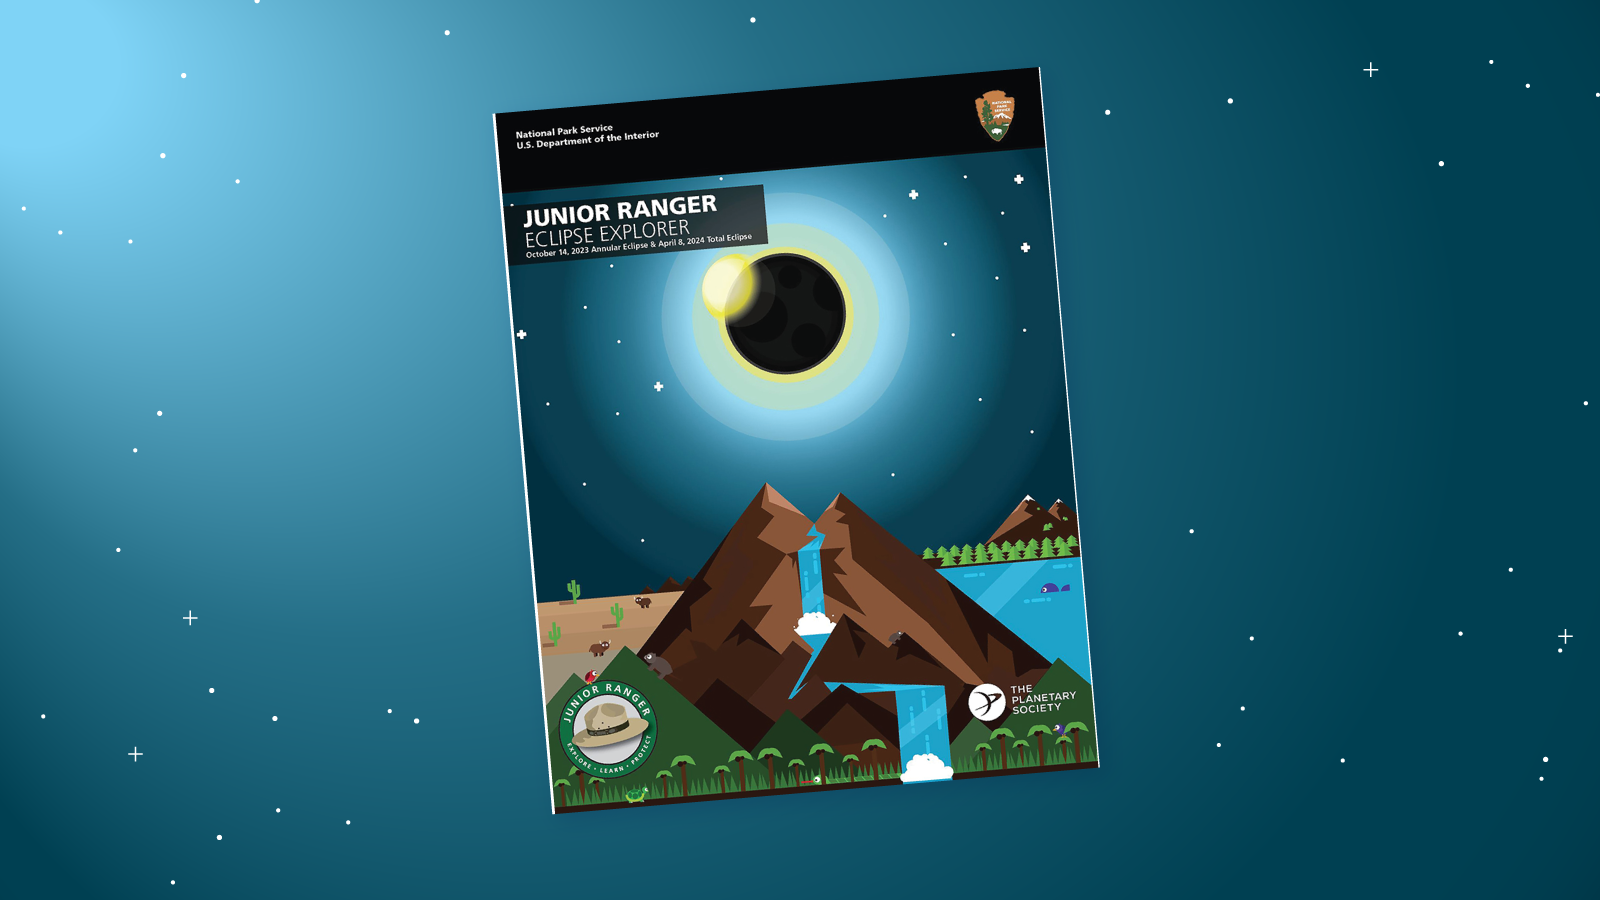 The Eclipse Explorer Junior Ranger book on a night sky blue background. The booklet features a colorful graphic design of an eclipse over a mountain. Logos: The Planetary Society, NPS, Junior Ranger